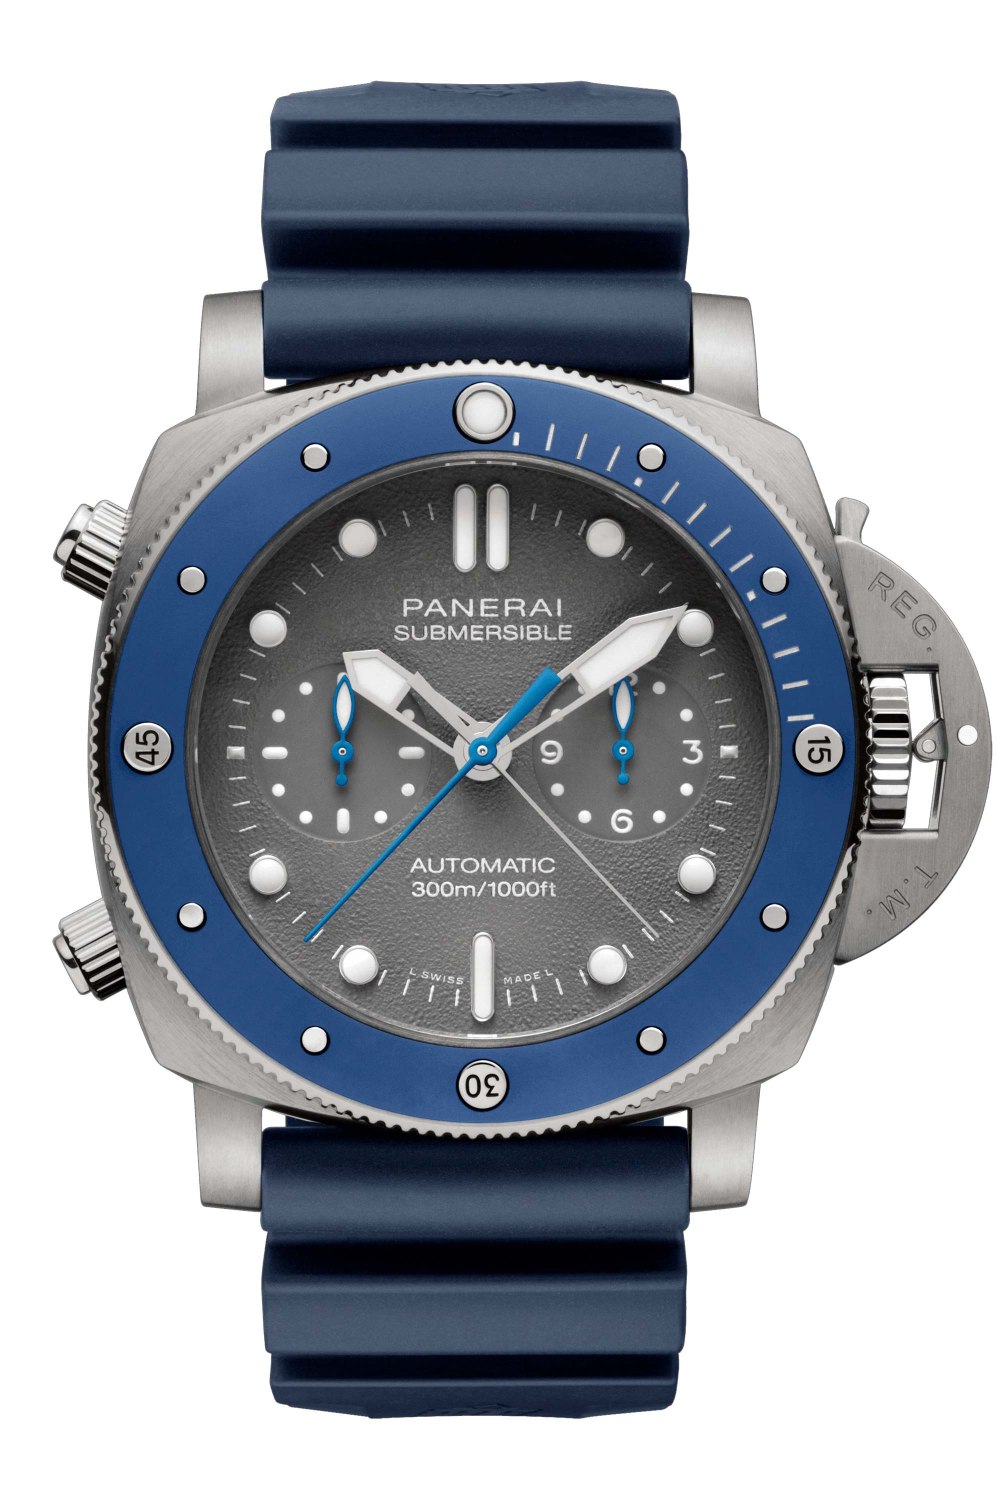 PANERAI Submersible Chrono Guillaume Nery Edition - 47MM PAM00982